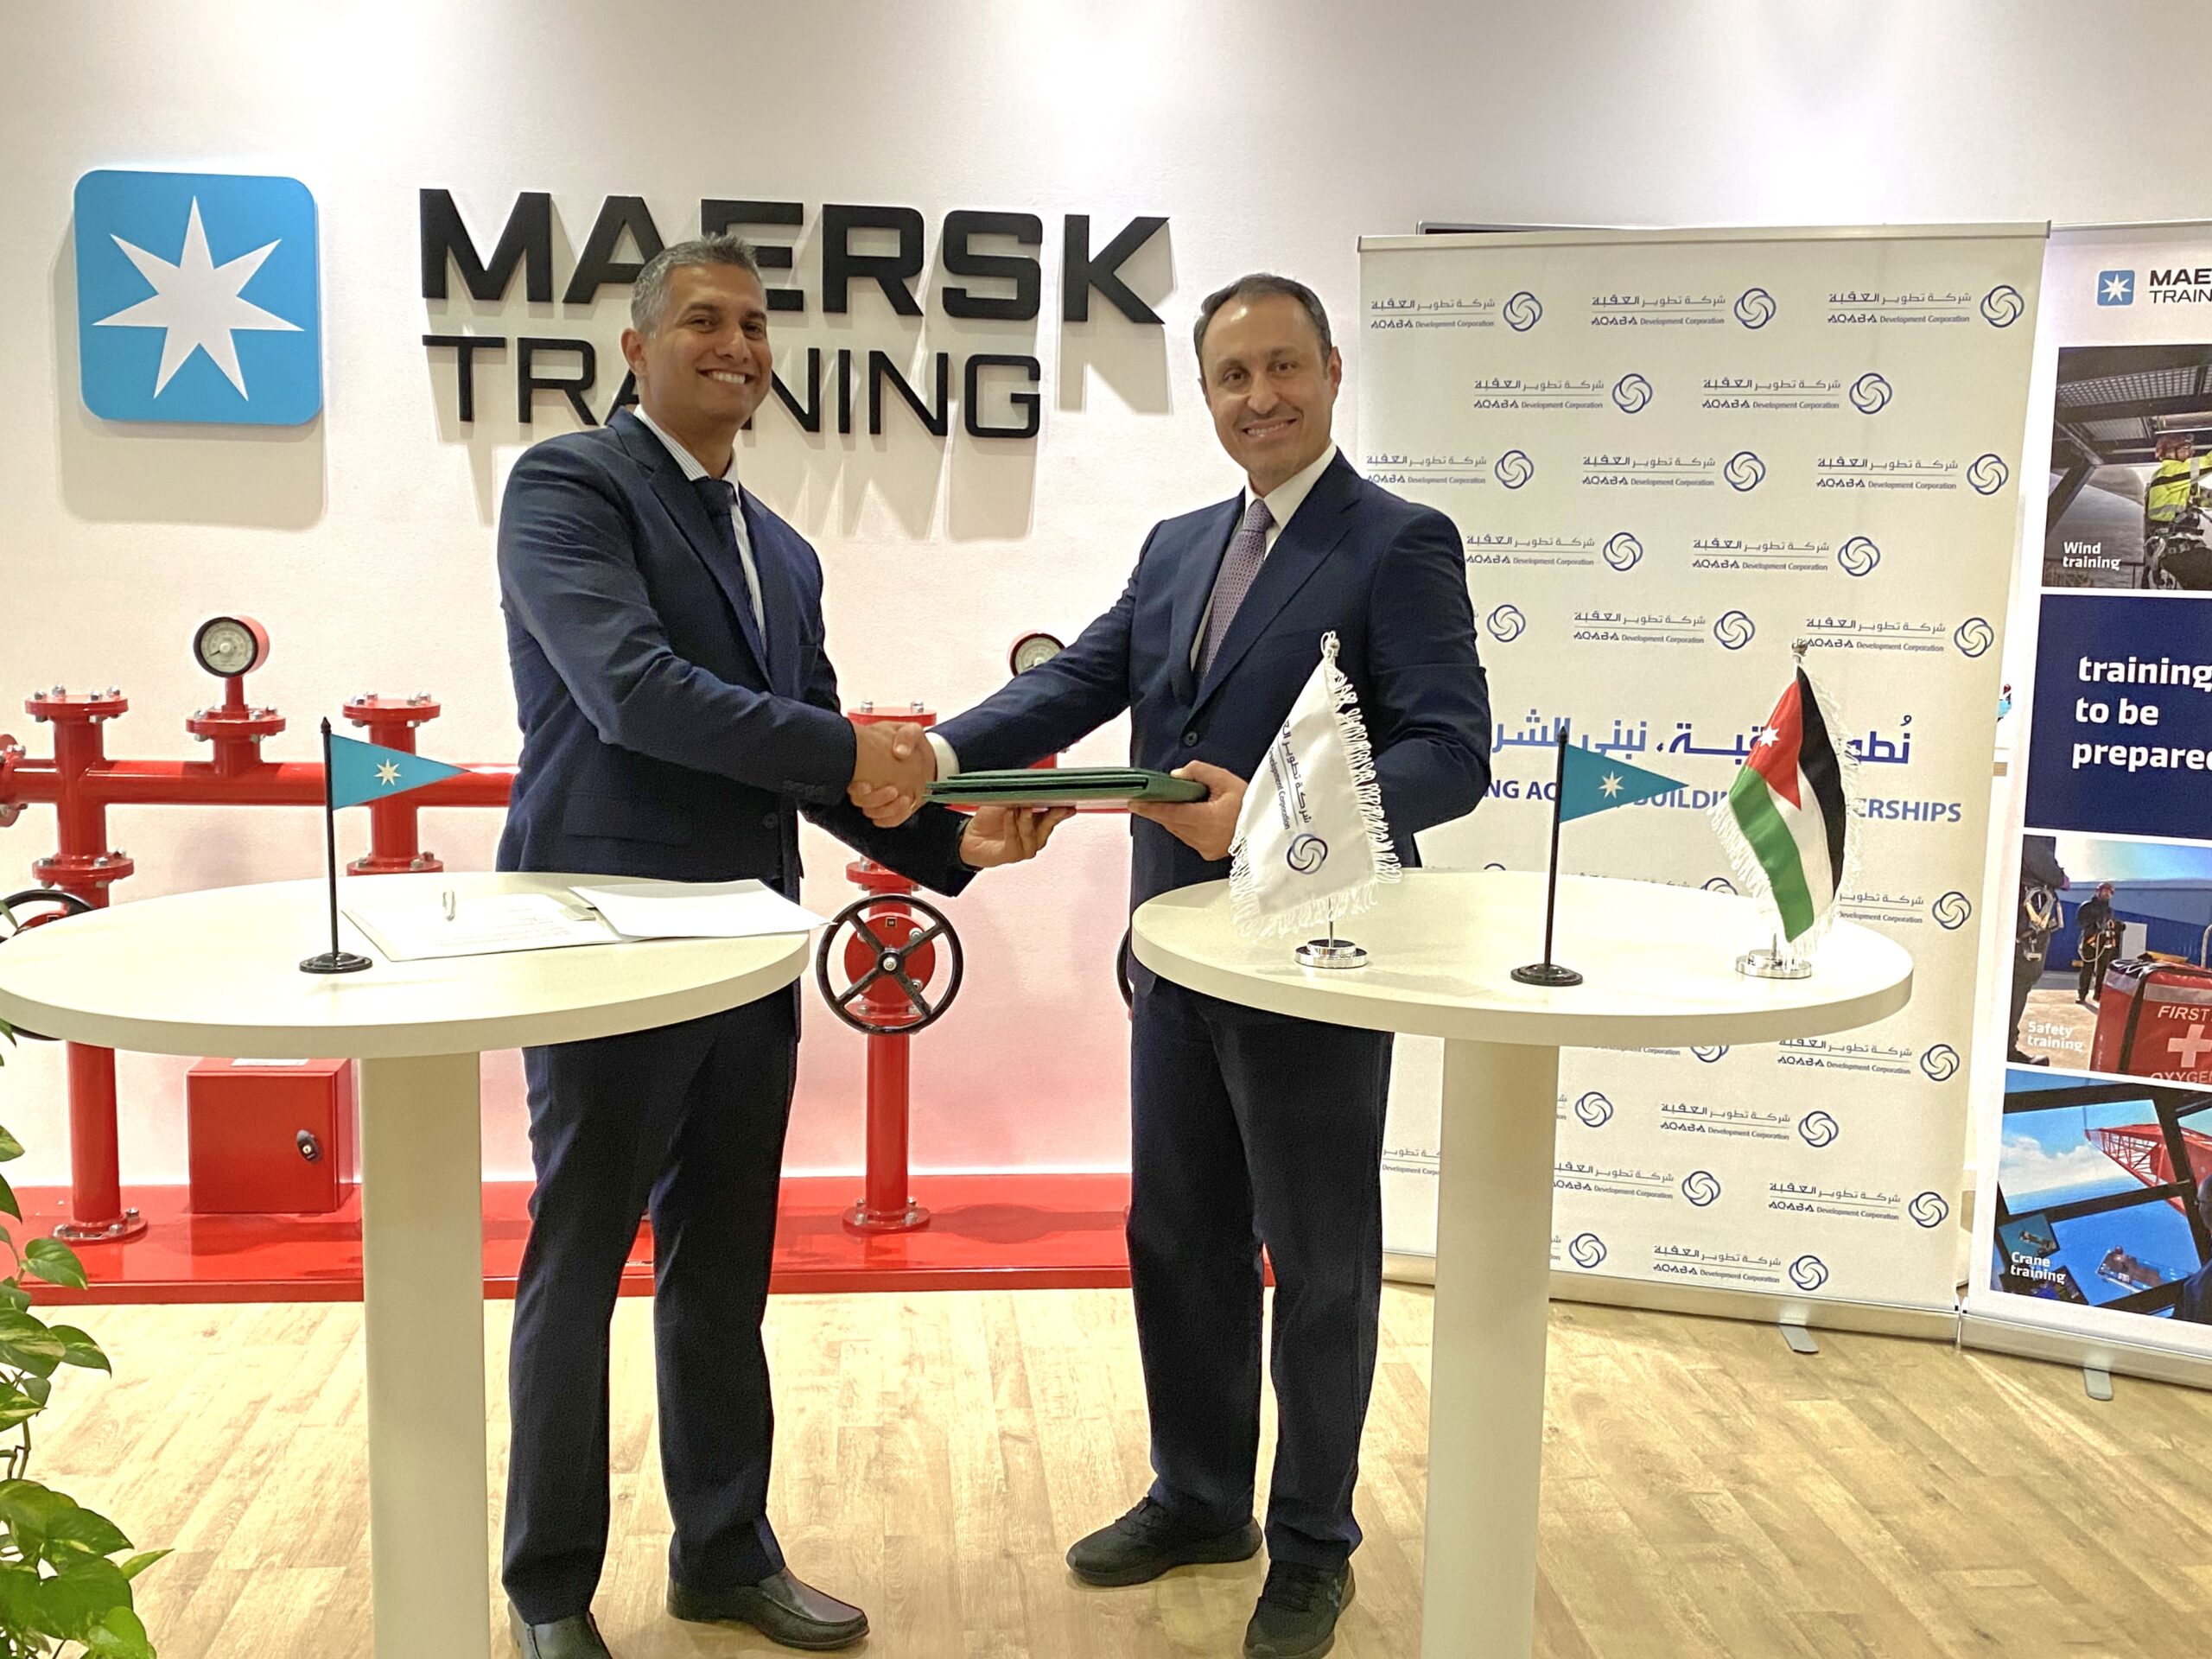 Maersk Training and Aqaba Development Corporation (ADC) sign MOU to develop a Center of Excellence in Aqaba